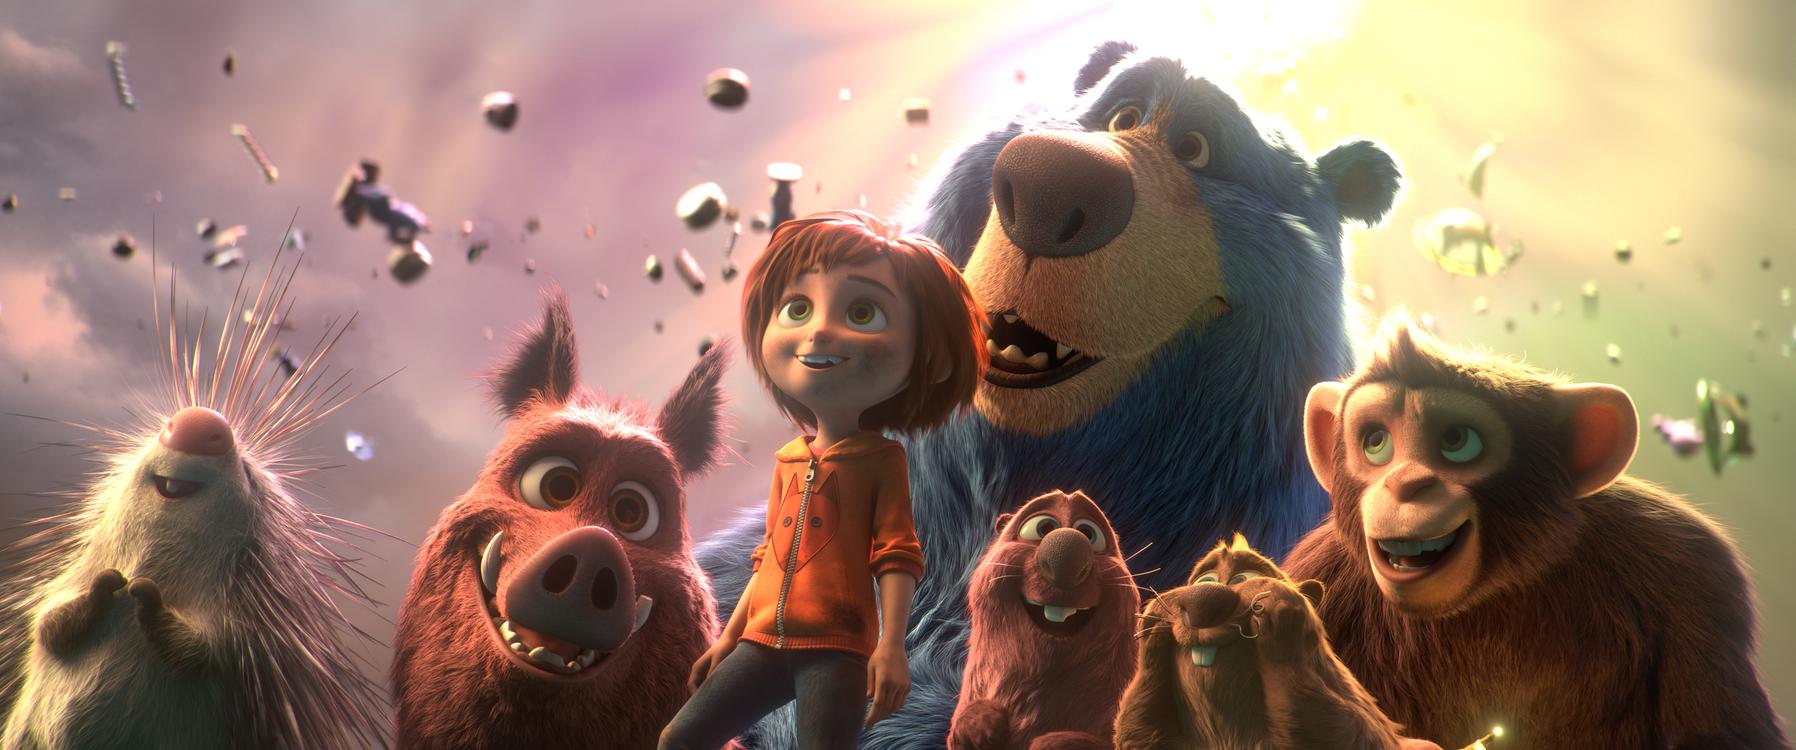 WONDER PARK tells the story of a magnificent amusement park where the imagination of a wildly creative girl named June comes alive.